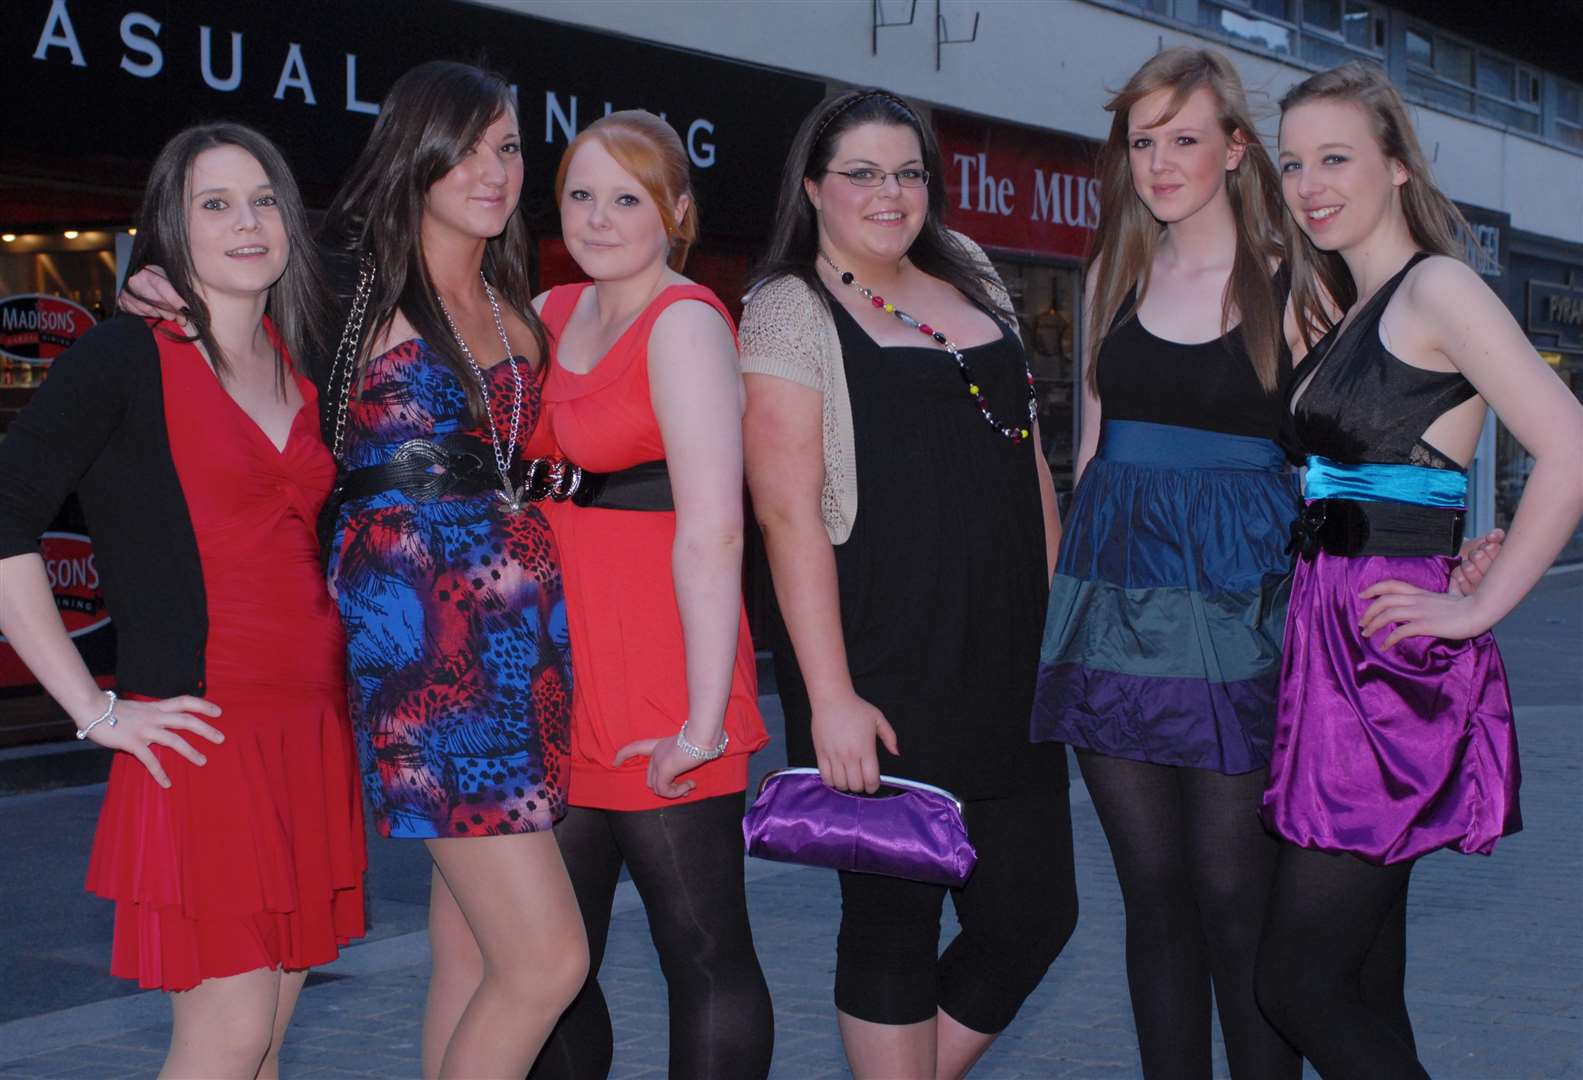 See: Copy By: .Cityseen;Off to Brooklyns for night out (LtoR) Megan MacArthur,Stephanie Bain,Eilish Rennie,Eirn Dignan,Allyson Sutherland and Imogen Jones.Pic By Gary Anthony..SPP Staff.Photographer.